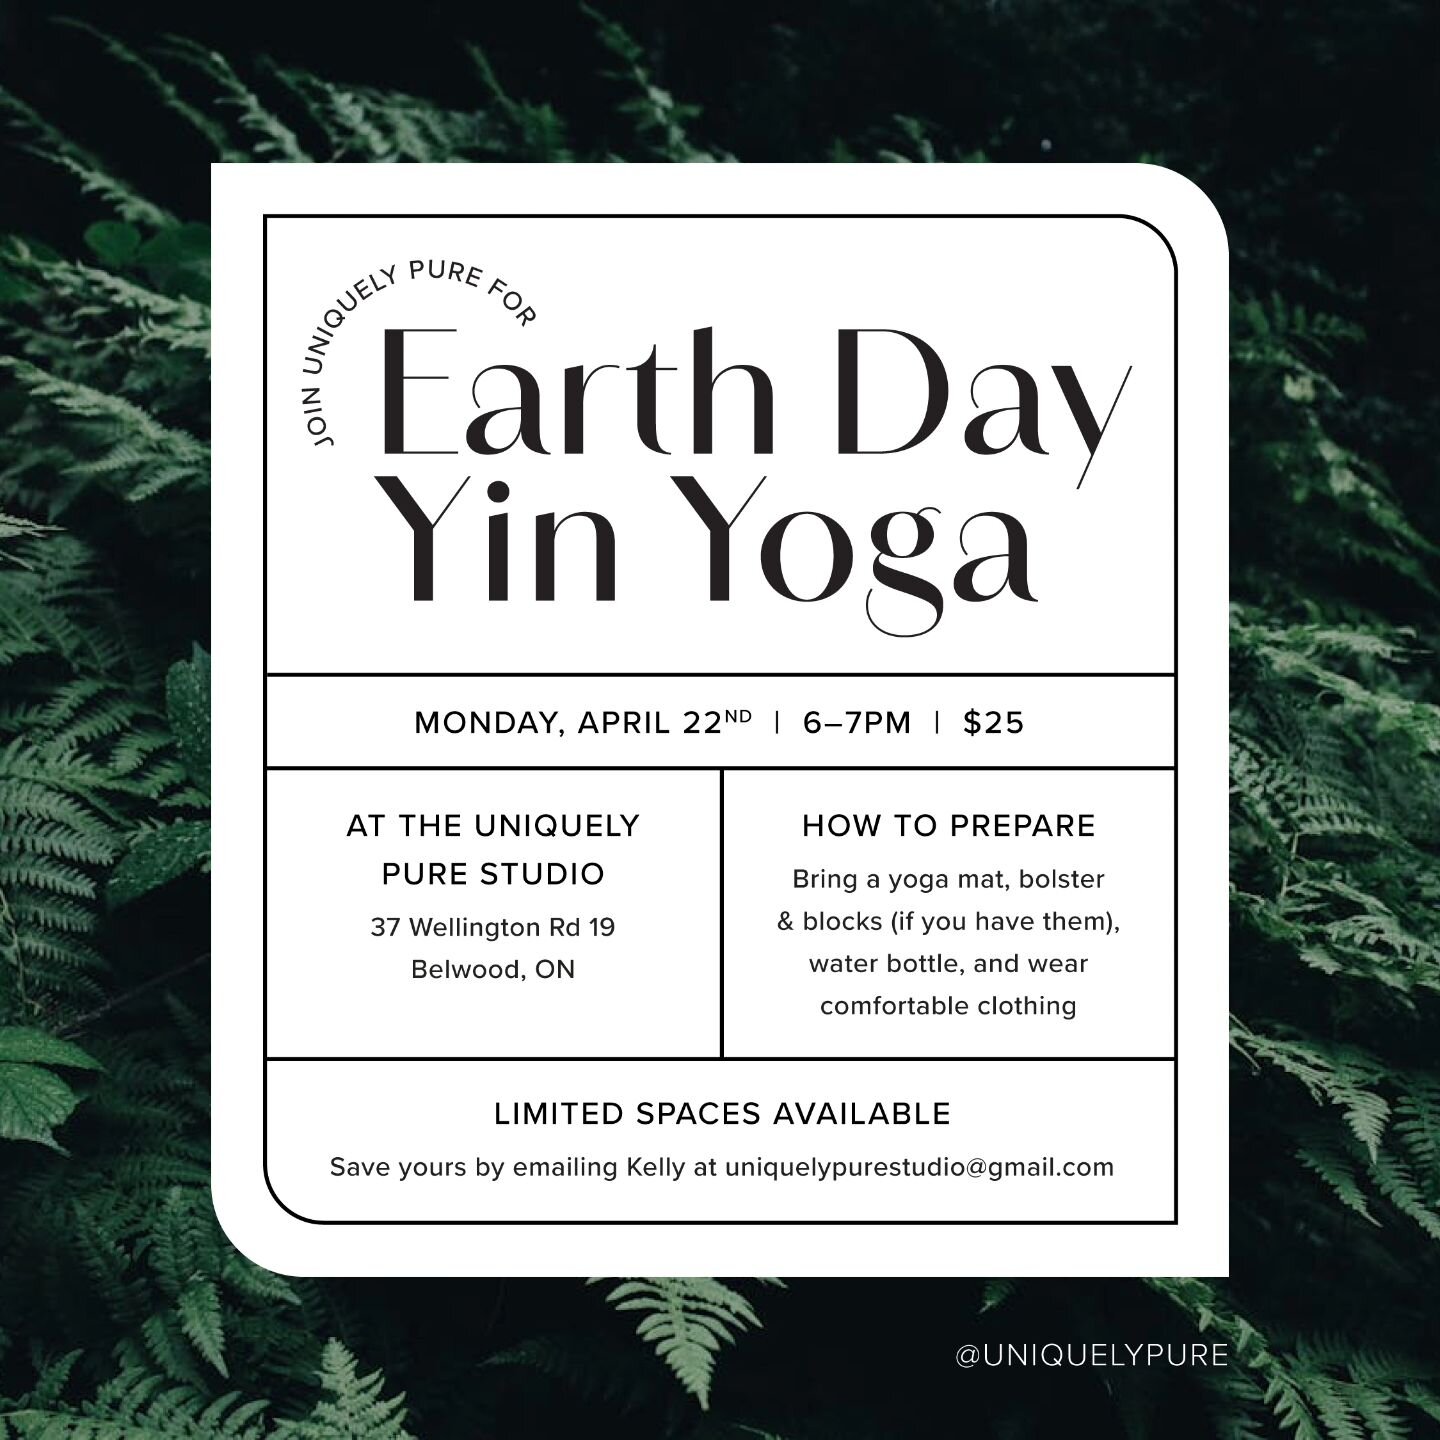 Join us for candlelit yin yoga at the Uniquely Pure Studio to celebrate Earth Day! 🌍🌿

Monday, April 22nd from 6&ndash;7pm for $25. Spaces are limited, so reserve yours by emailing Kelly at uniquelypurestudio@gmail.com

Bring a yoga mat, bolster &a